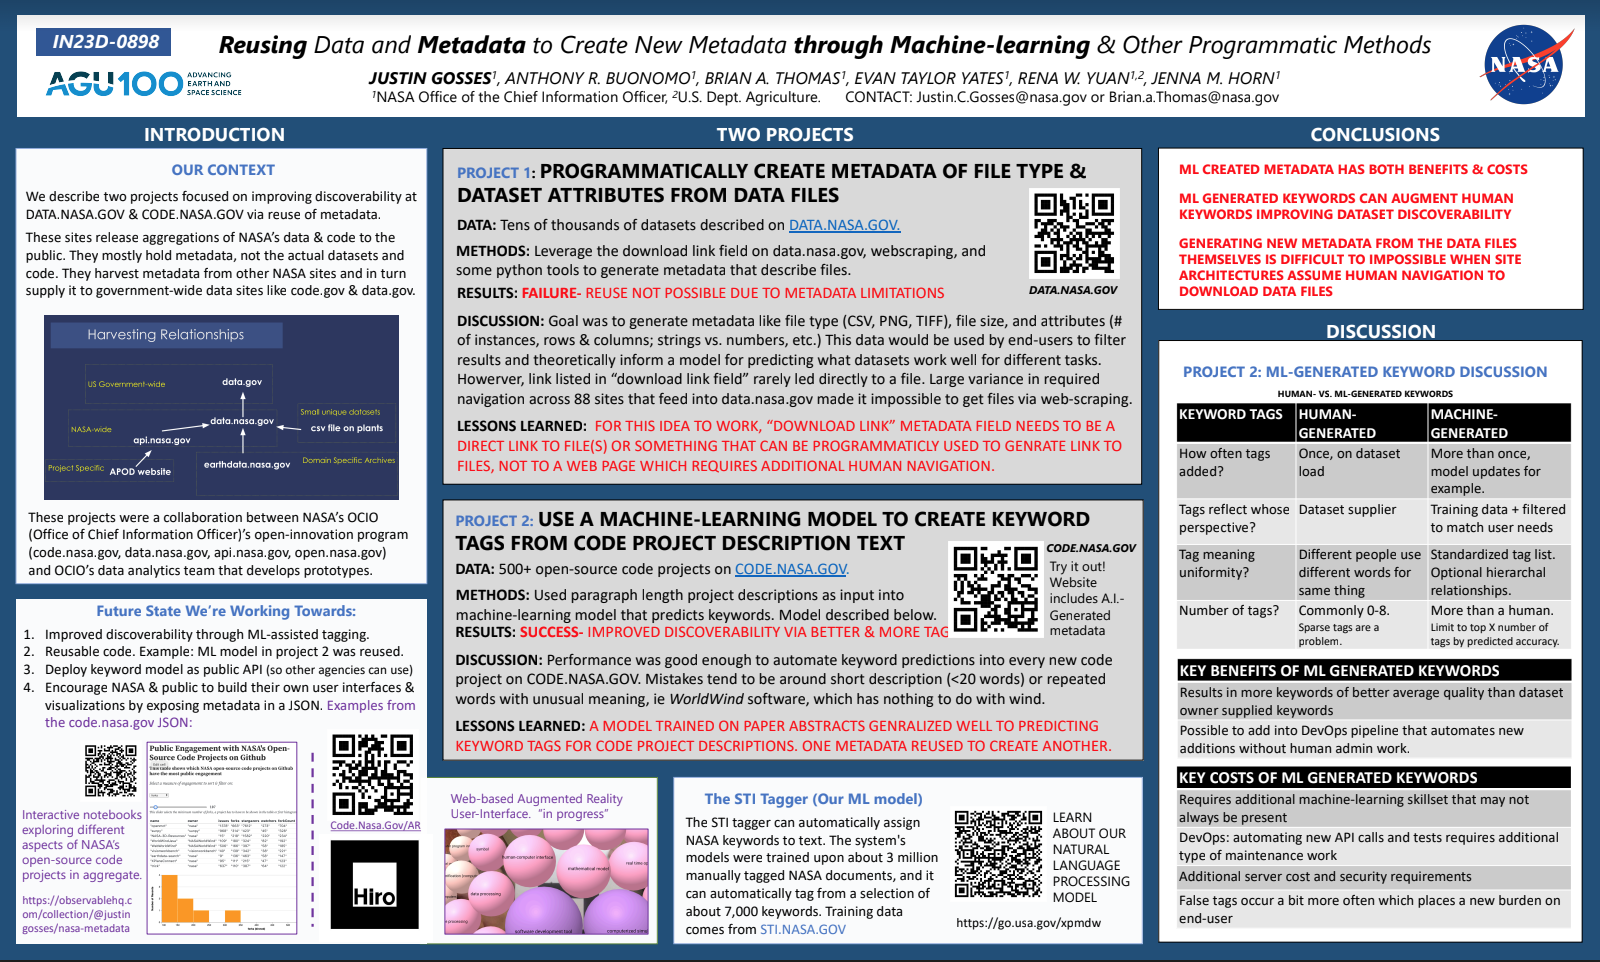 "Screenshot of Poster titled Reusing Data and Metadata to Create New Metadata through Machine-learning & Other Programmatic Methods that was presented at AGU in 2019."